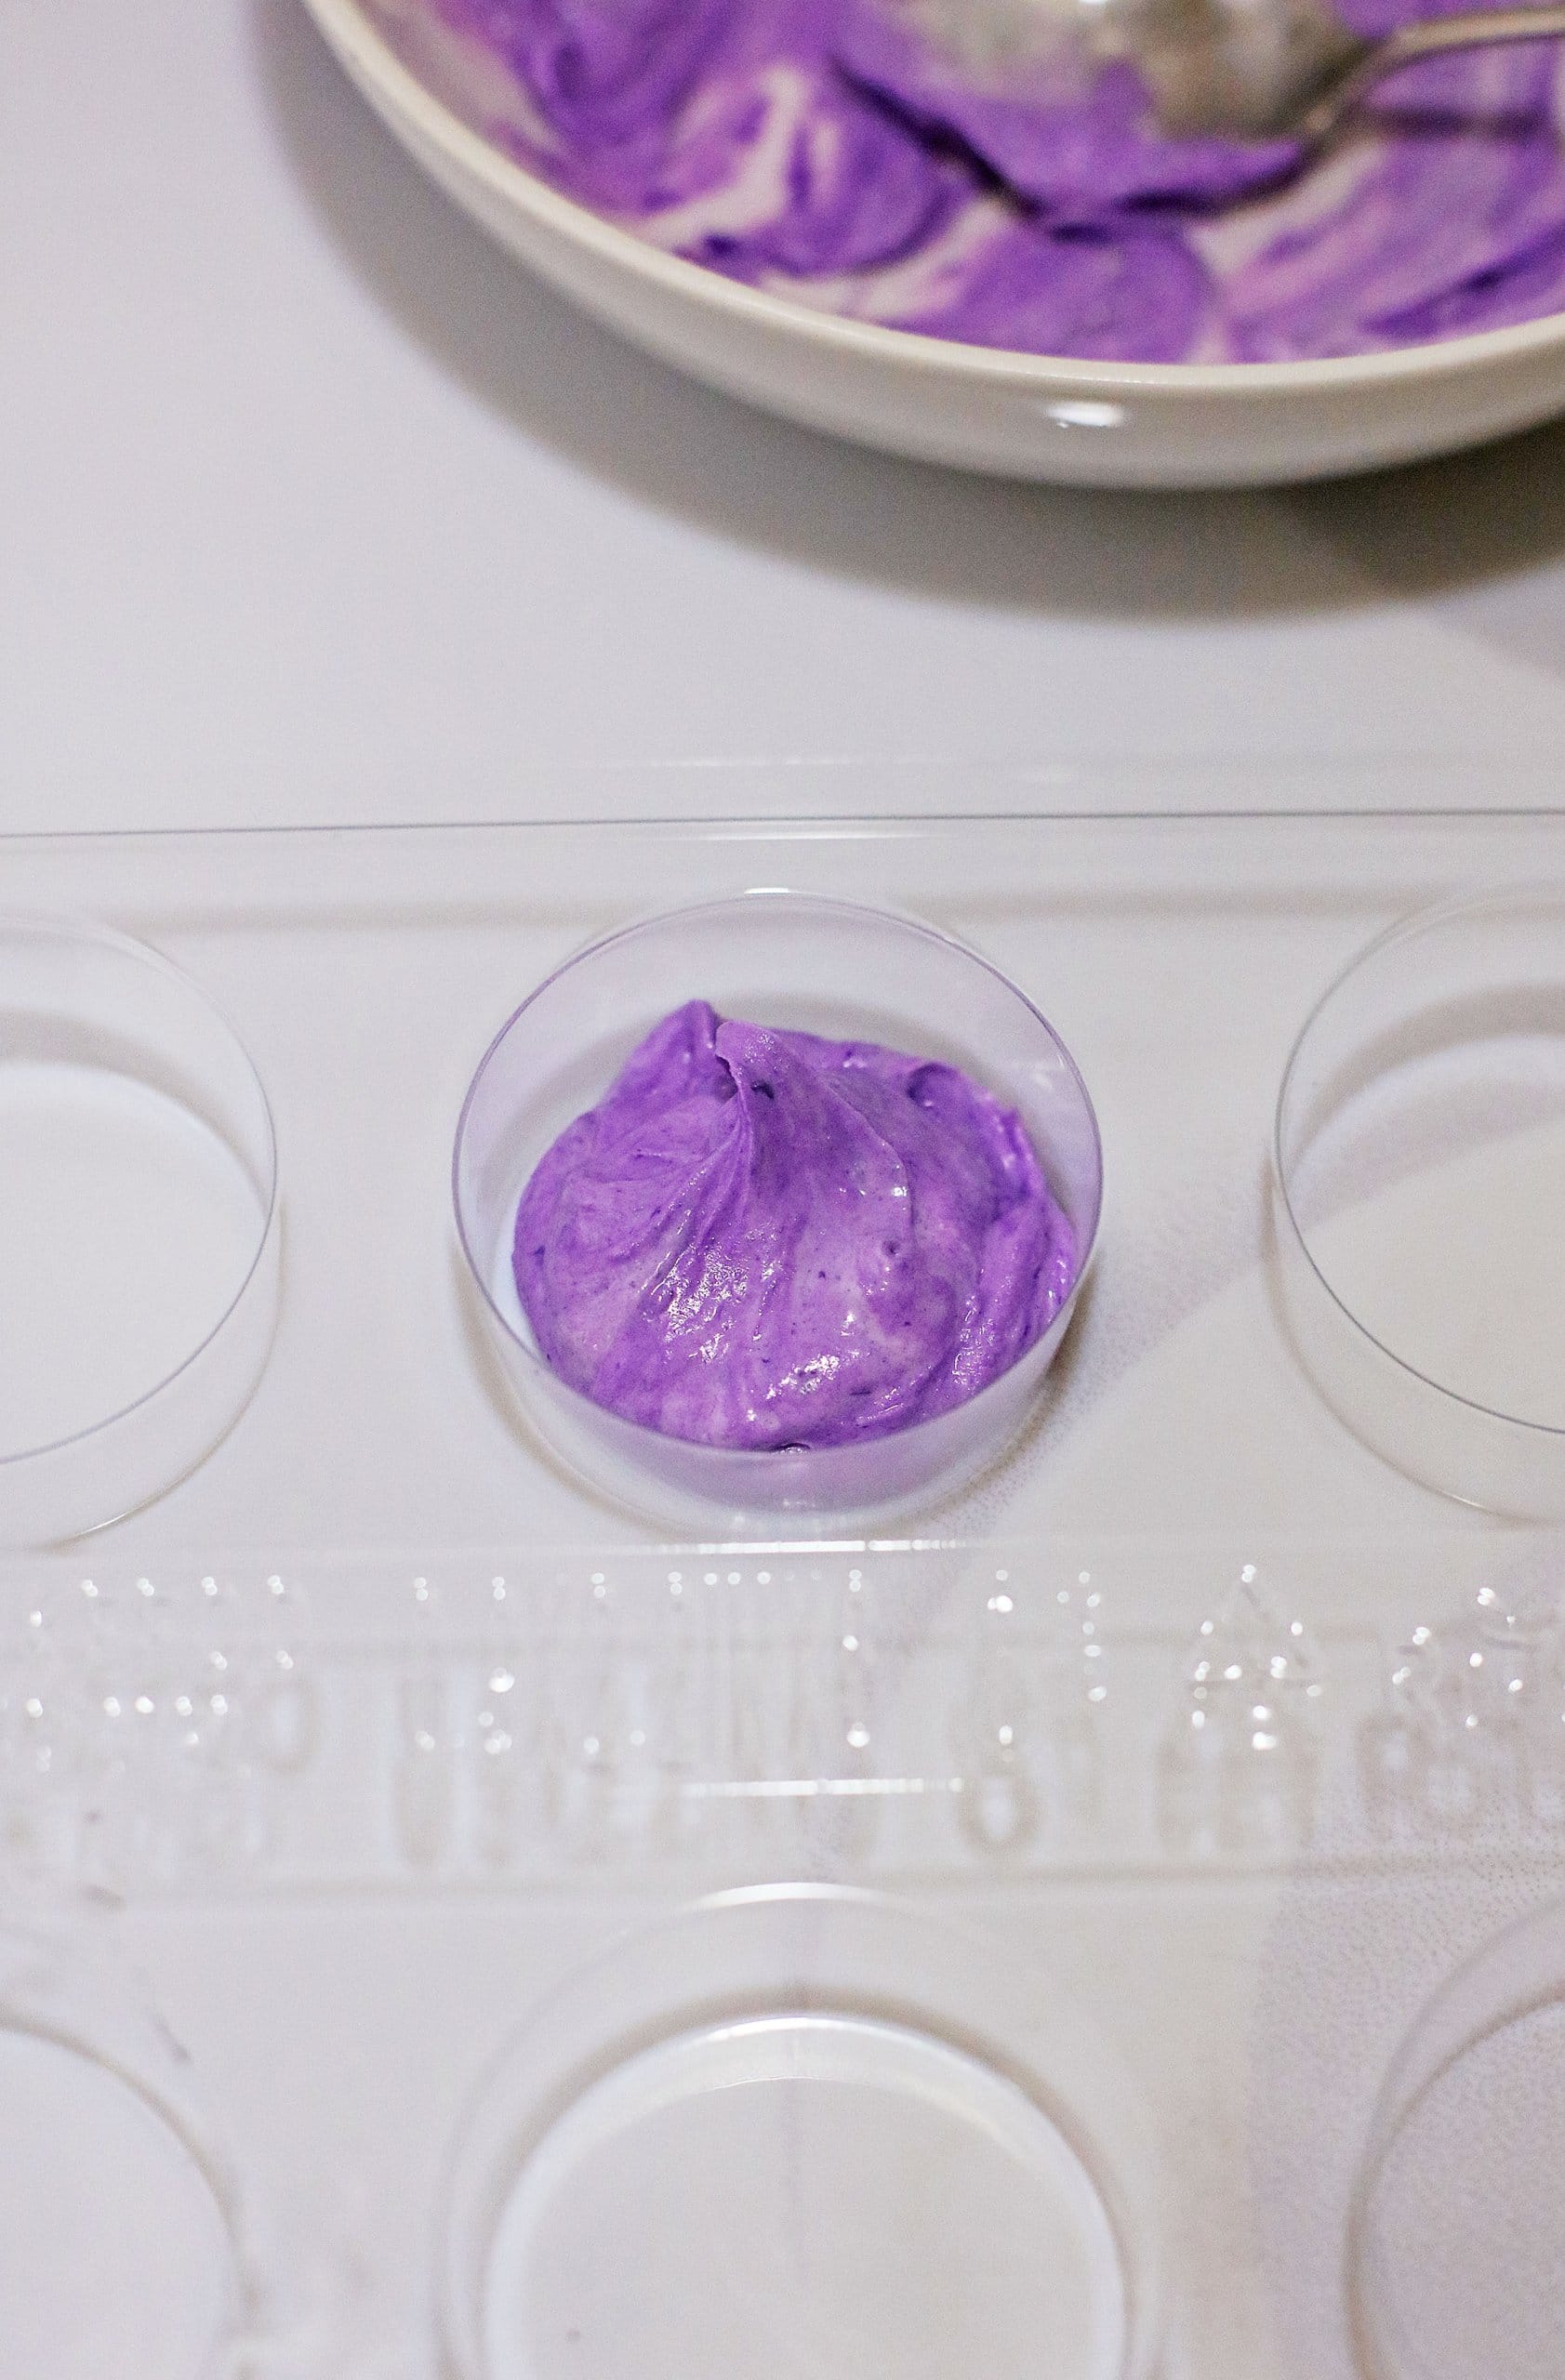 purple almond dark being spread into a cookie mold